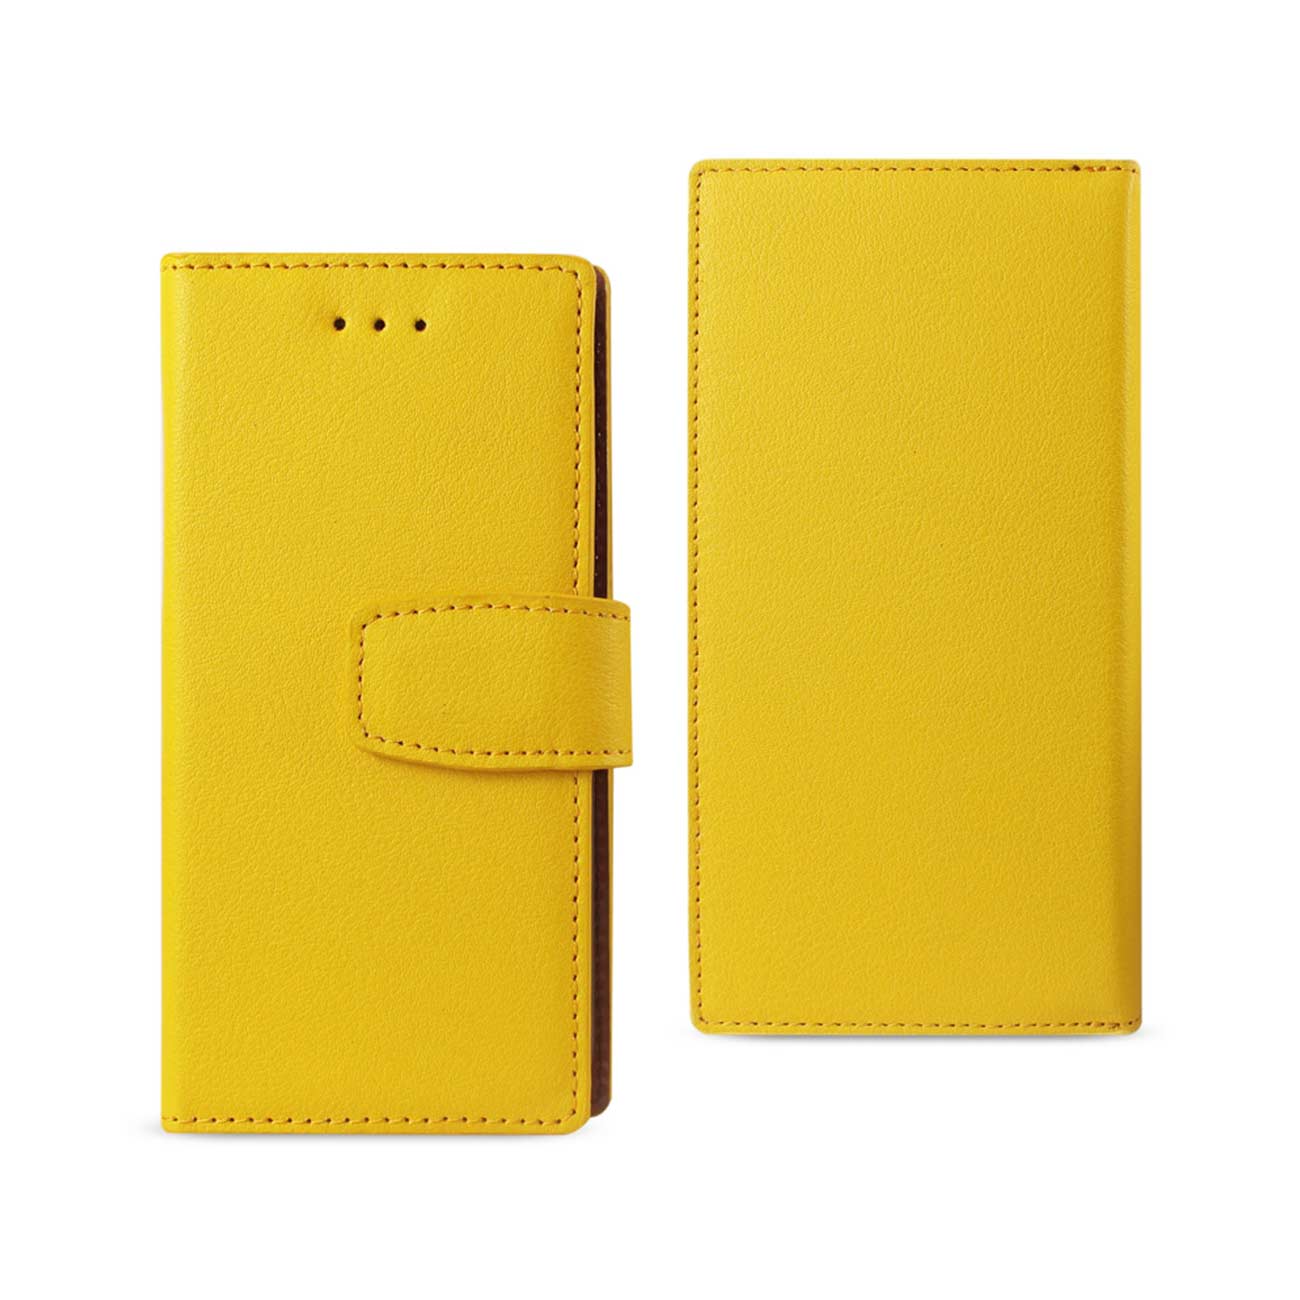 Wallet Case Synthetic Bullhide Leather With RFID Card Protection iPhone 7/ 8/ SE2 Yellow Color